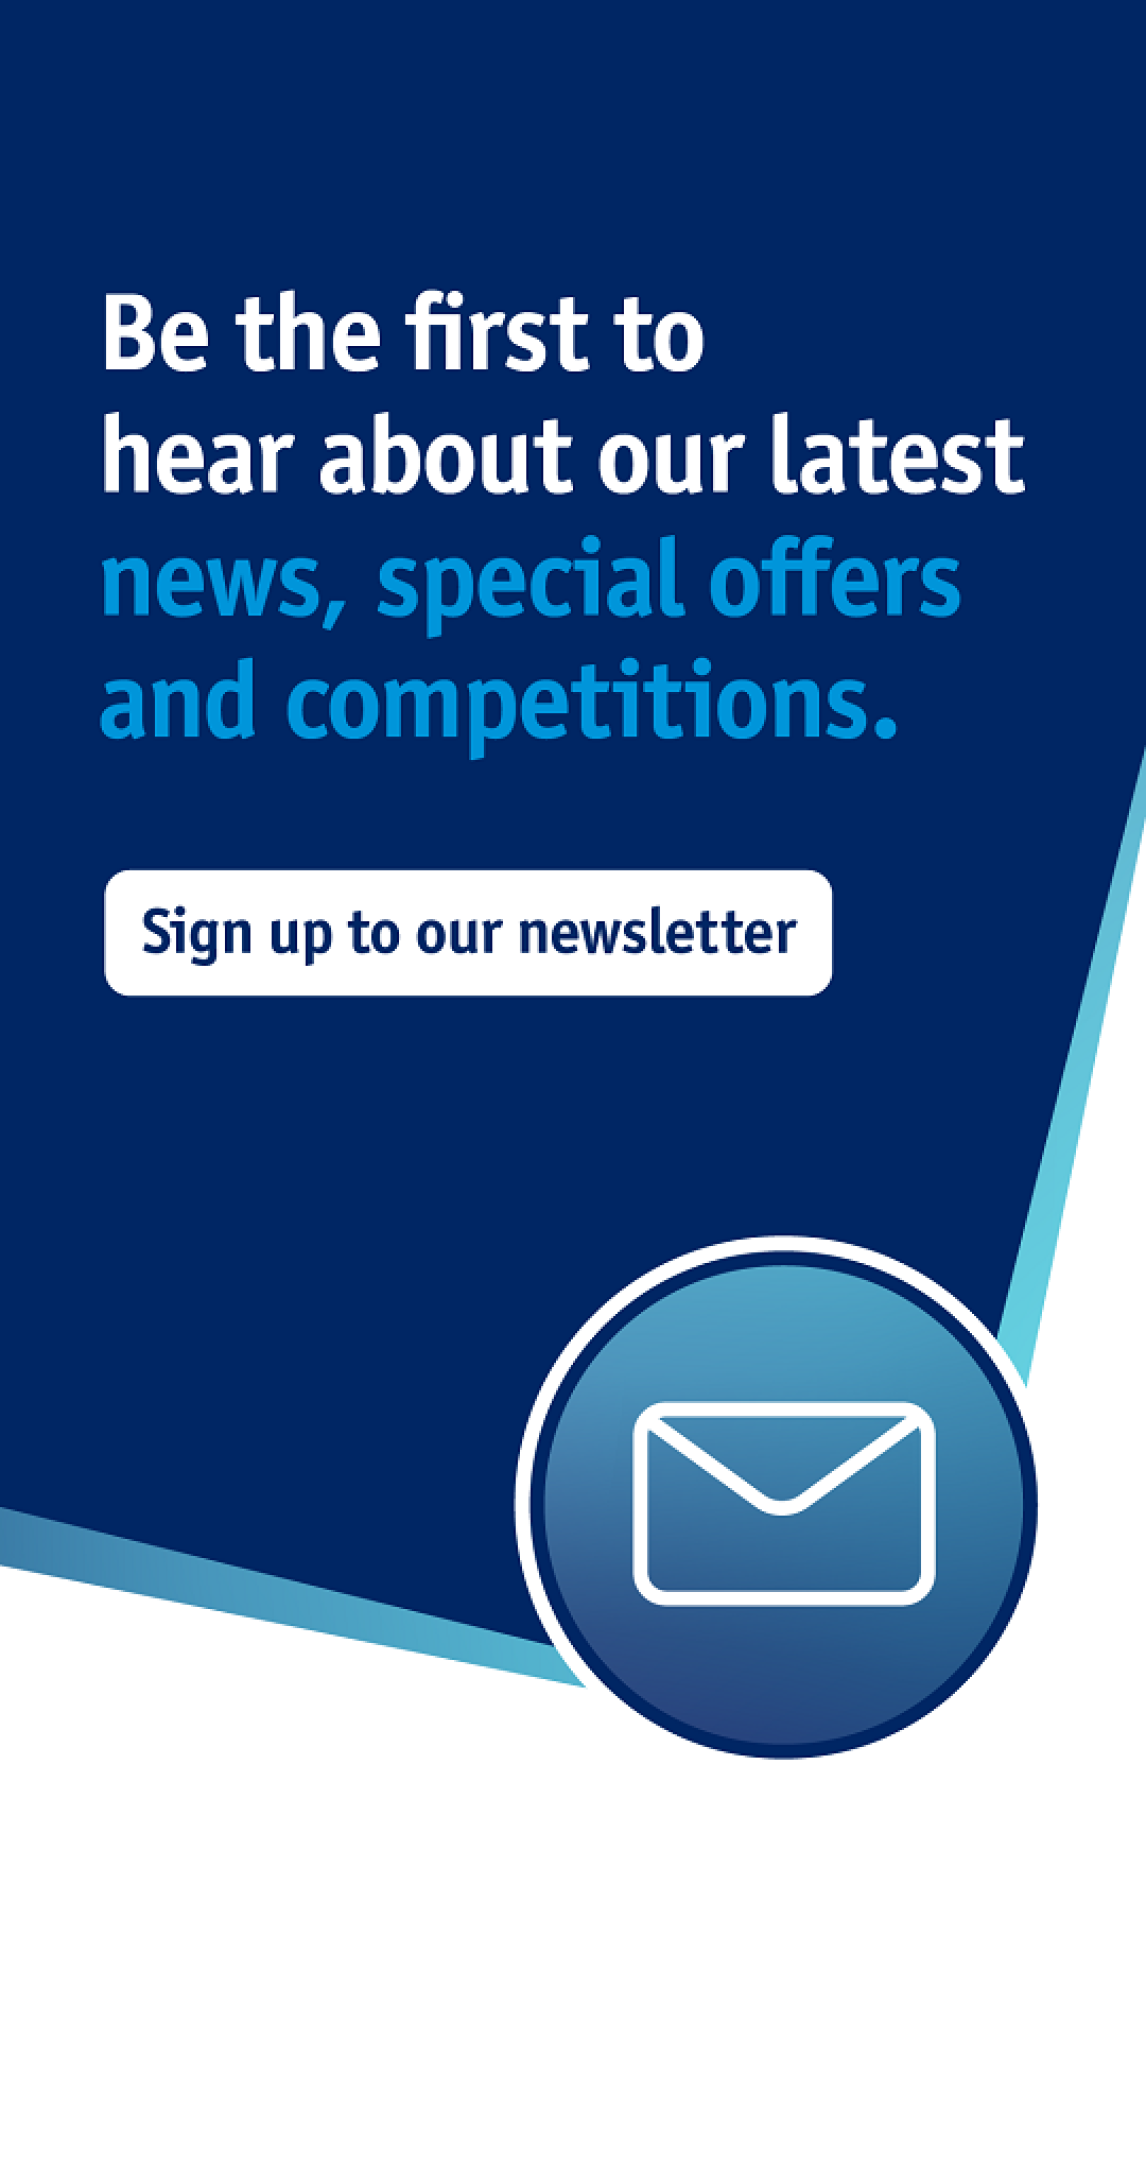 Be the first to hear about our latest news, special offers and competitions. Sign up to our newsletter